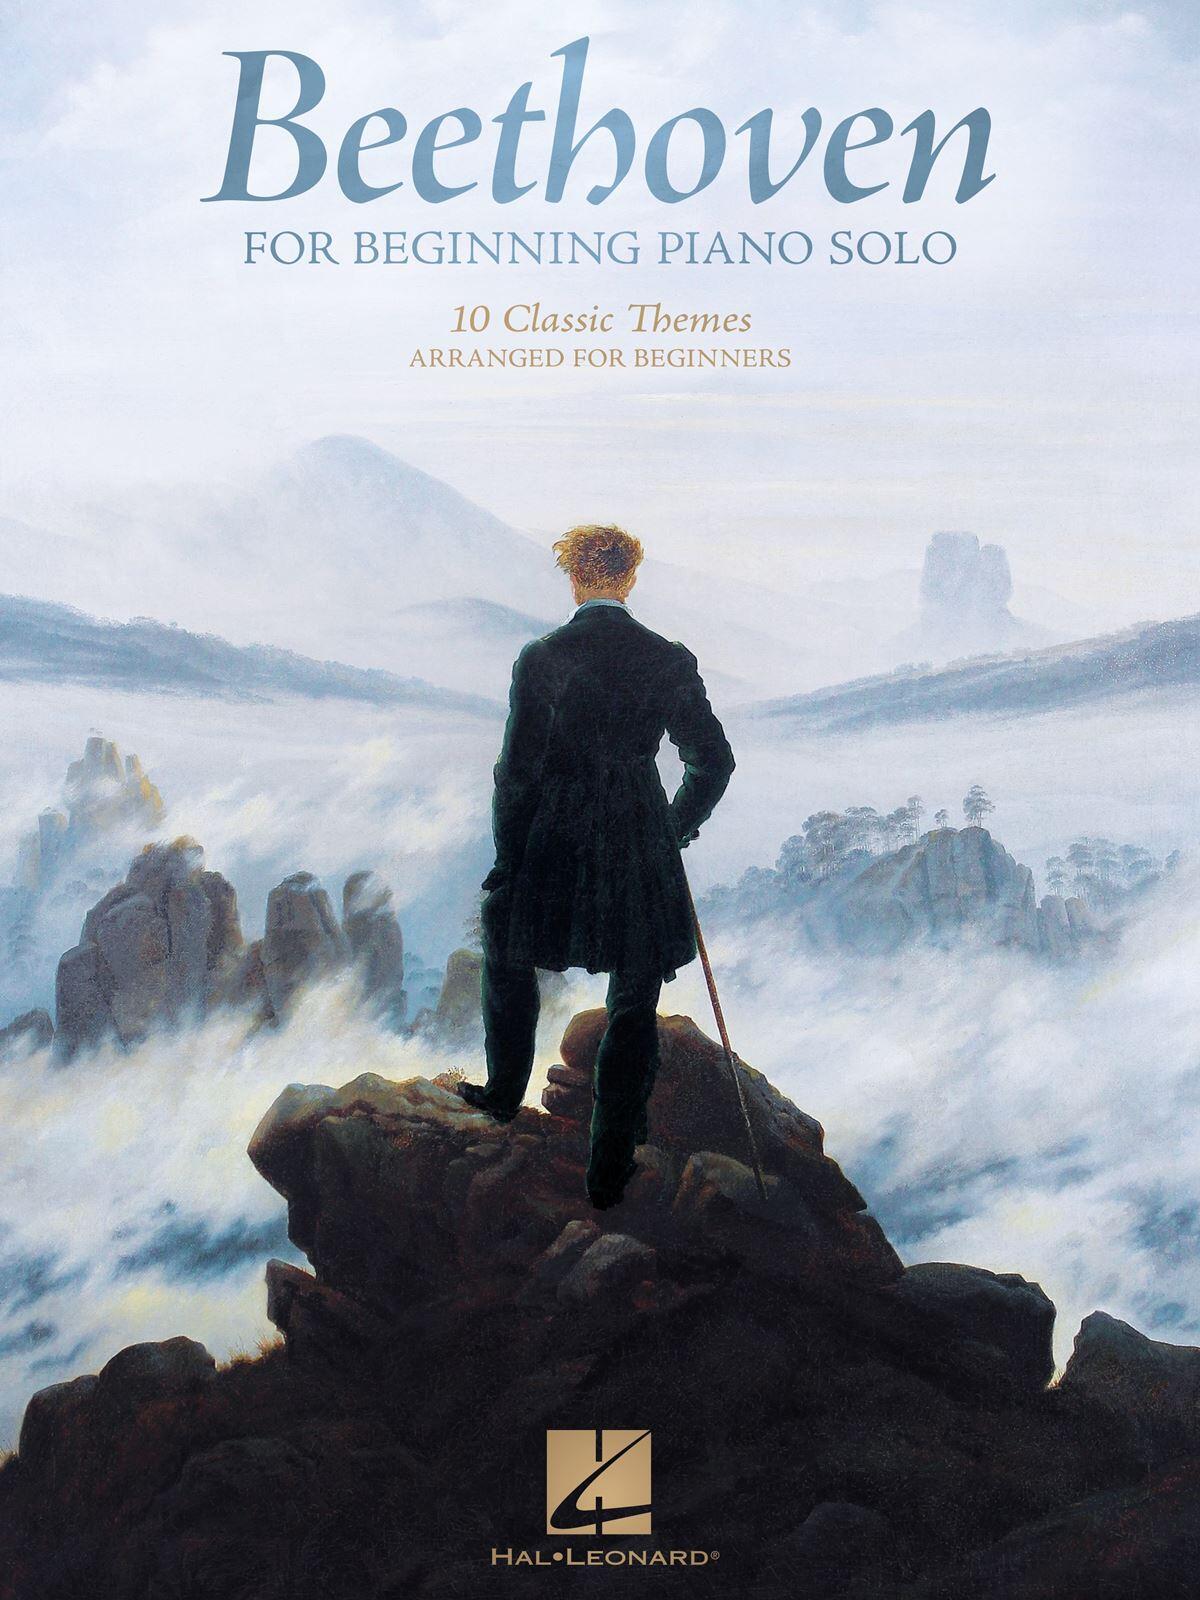 Beethoven for Beginning Piano Solo 10 Classic Themes Arranged for Beginners : photo 1